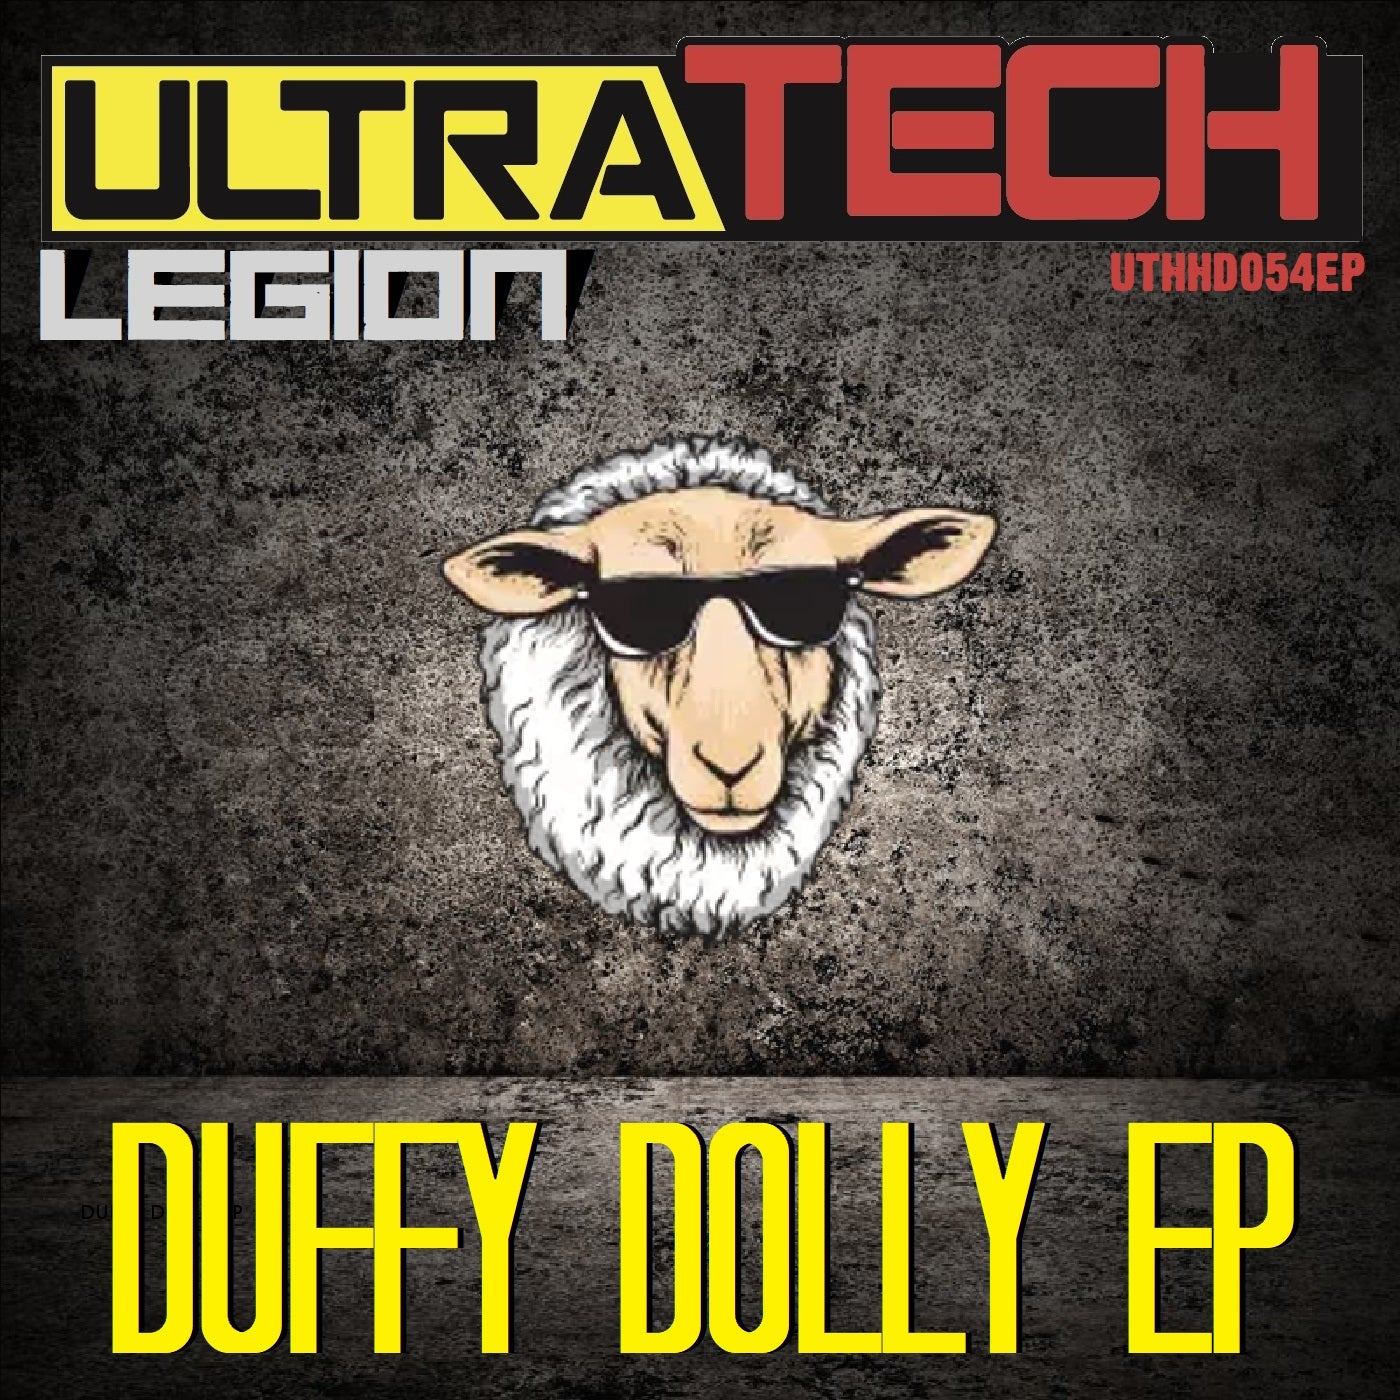 Duffy Dolly EP